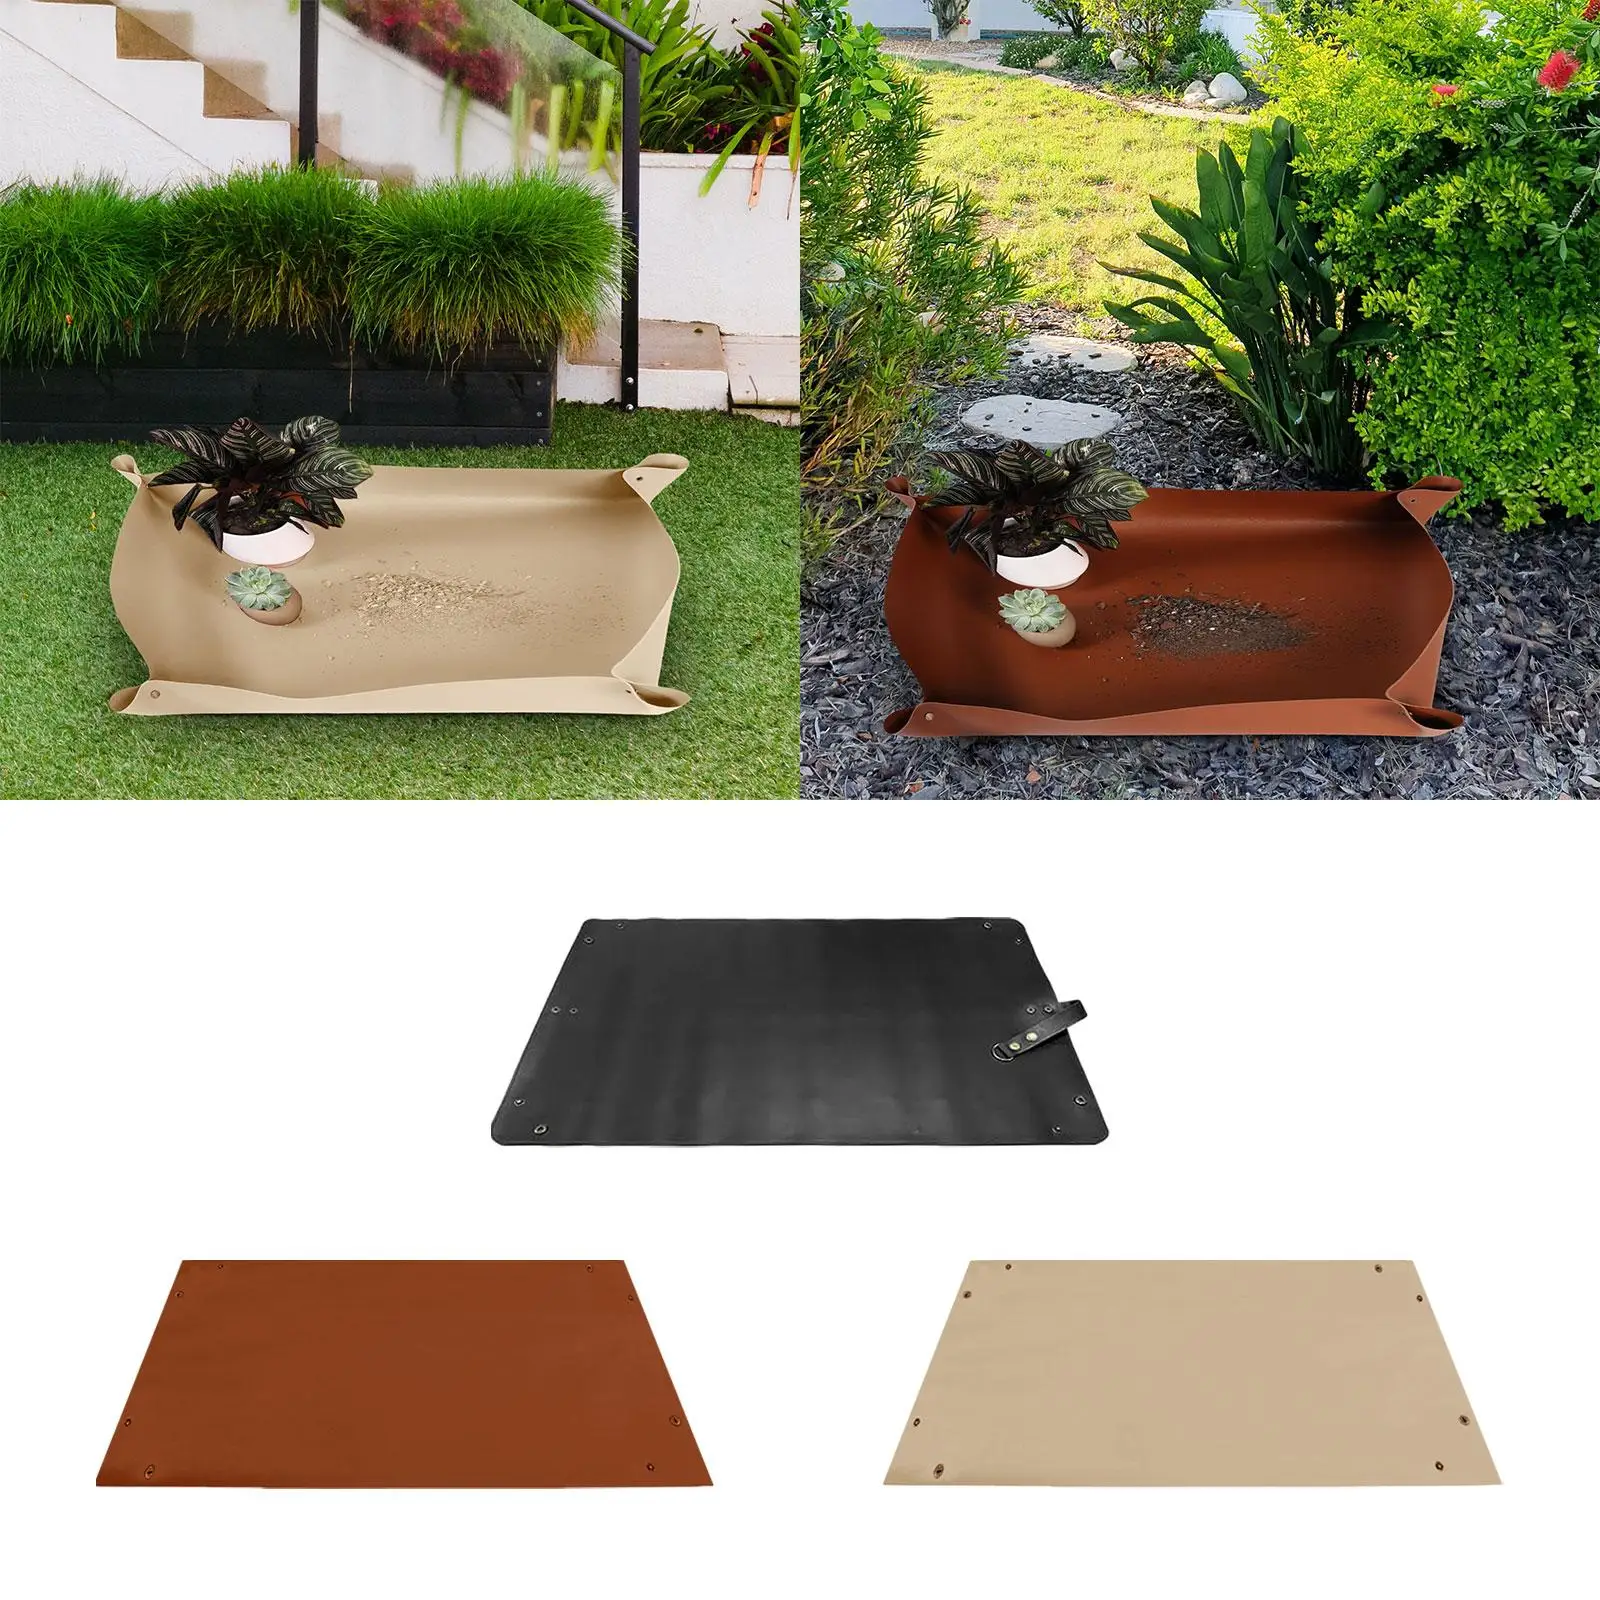 Transplanting Mat PU Leather 23.6x11.8inch with Storage Strap Plant Potting Tray for Mess Control Easily Clean Wear Resistant